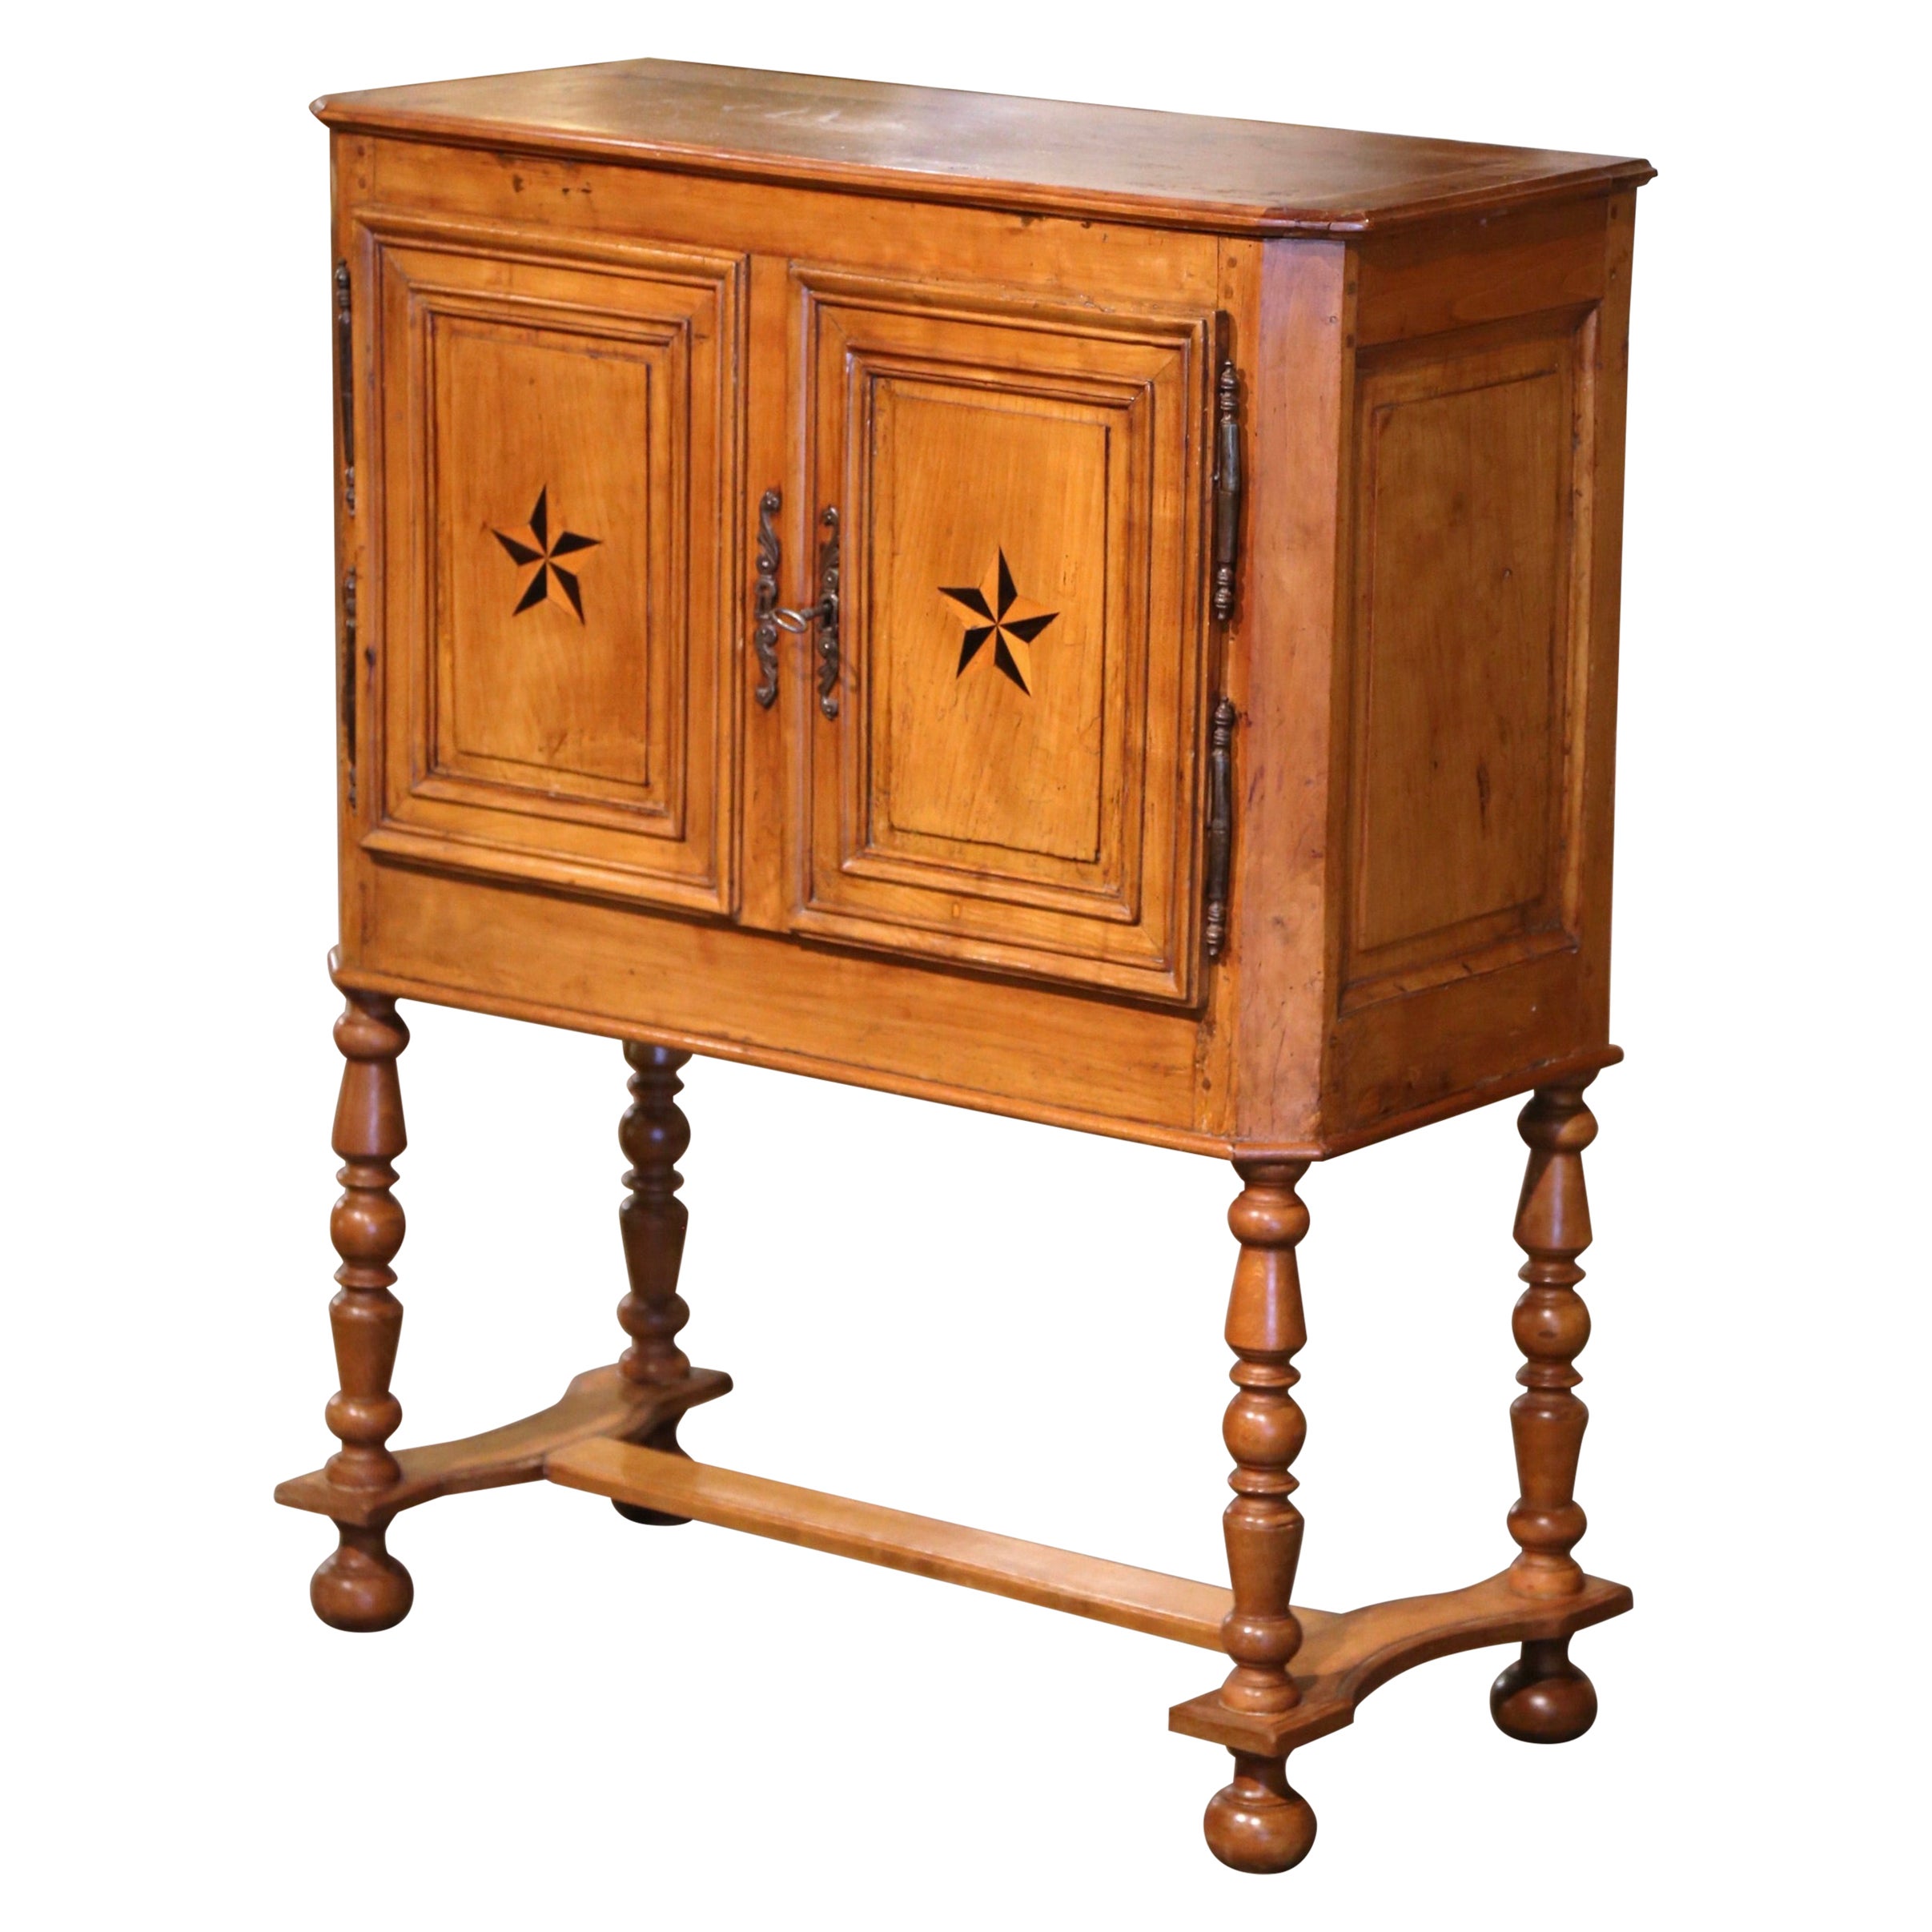 19th Century Louis XIII Carved Cherry and Oak Buffet Cabinet with Inlaid Motifs